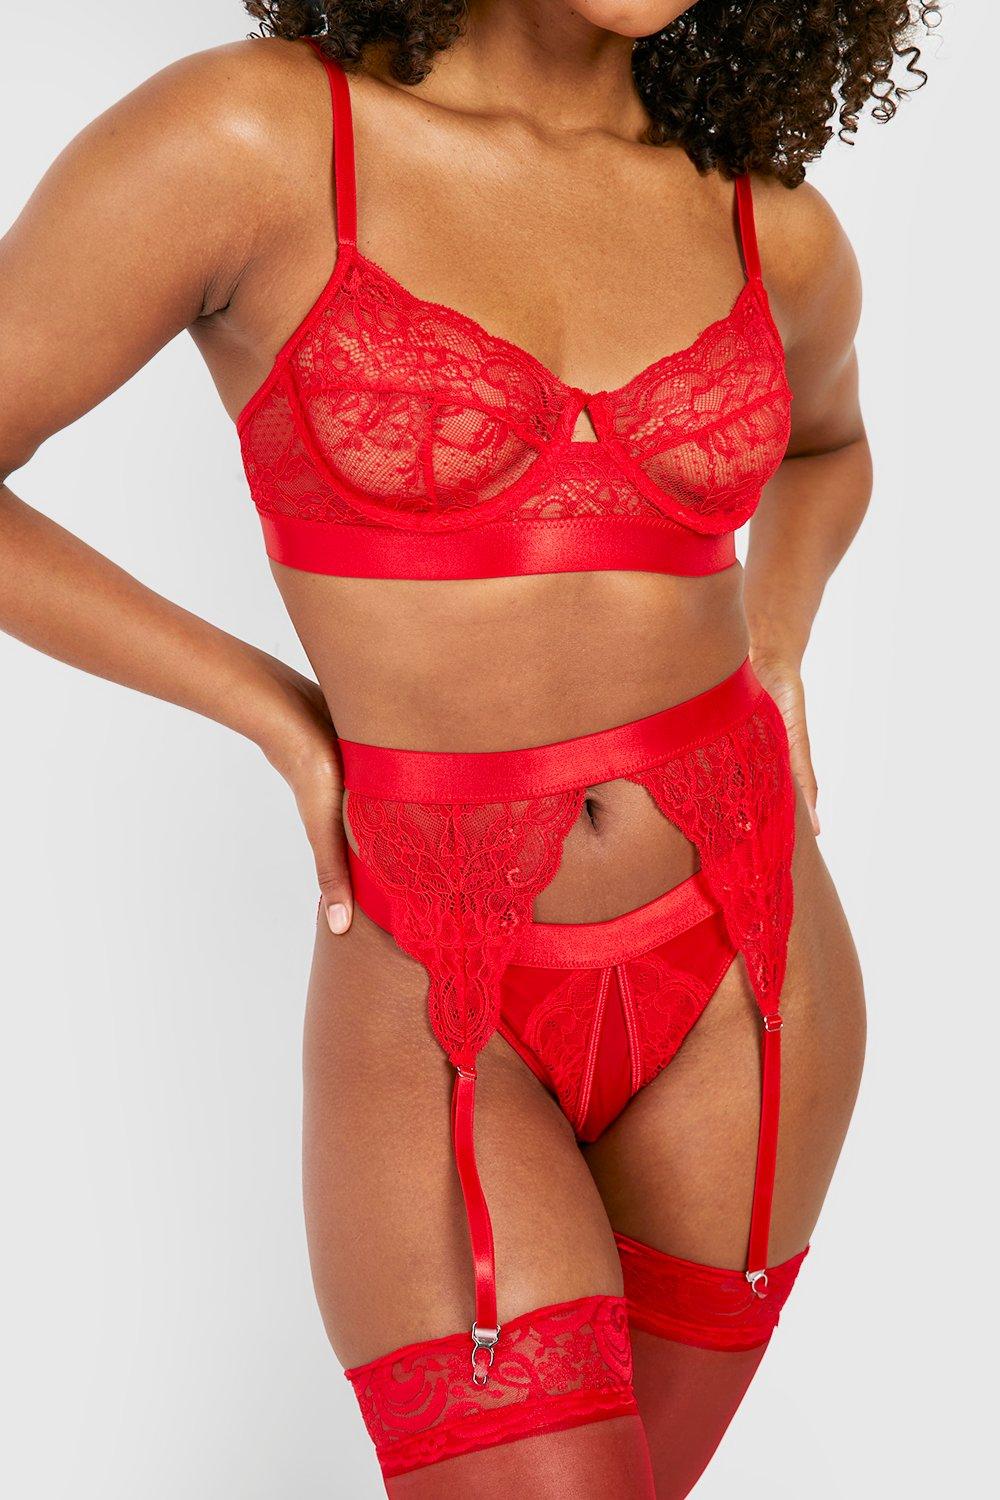 Women's Crotchless Lace Bra Thong And Suspender Set